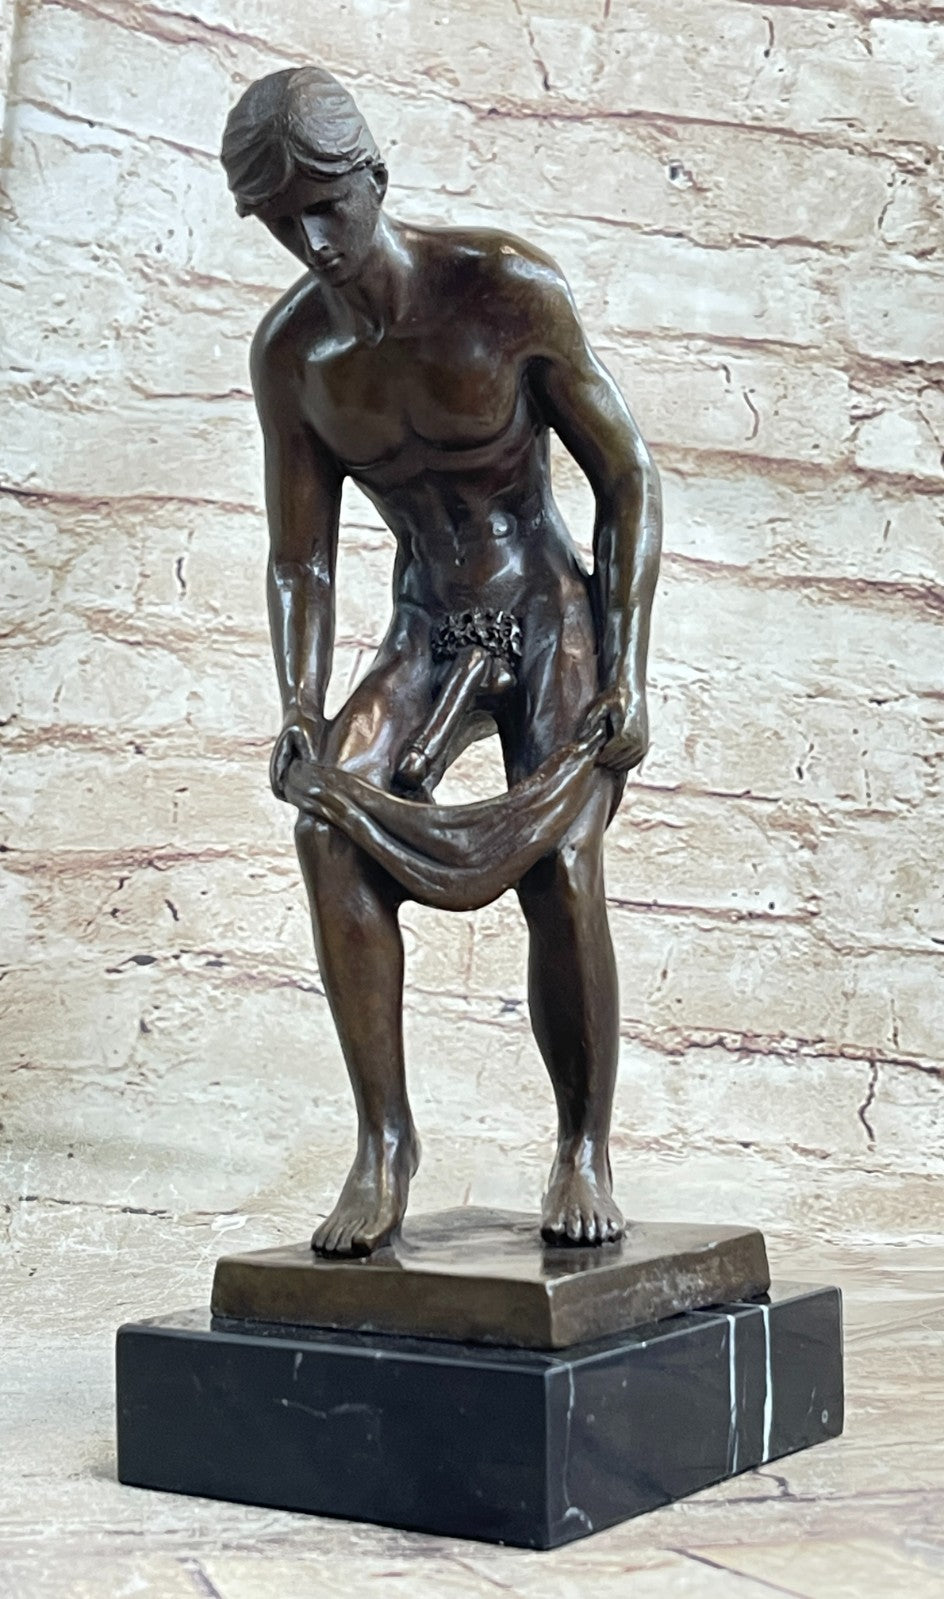 EROTIC STANDING NAKED MALE NUDE GAY GIFT BRONZE FIGURINE STATUE - NEW DECOR SALE